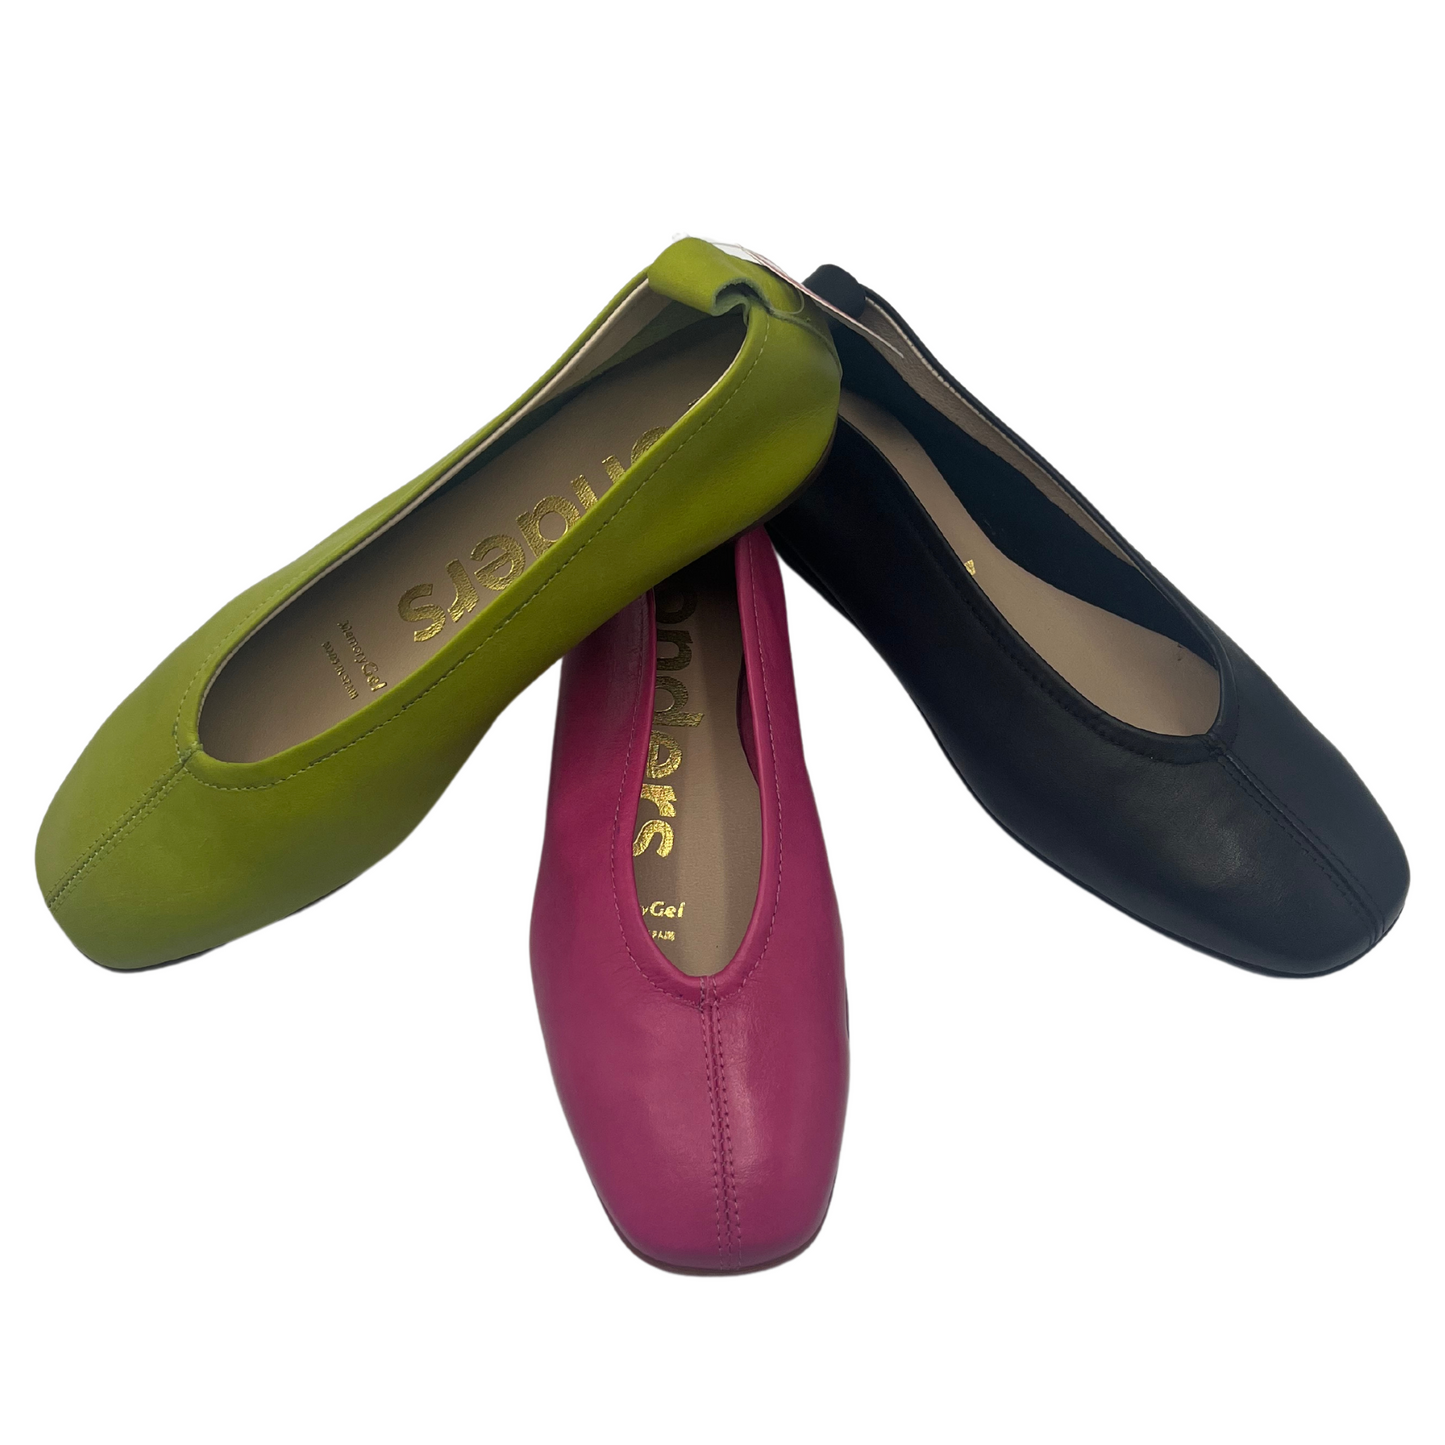 Top view of three ballet flats piled on top of each other. Apple green. orchid pink and black. All have leather upper and rubber outsole